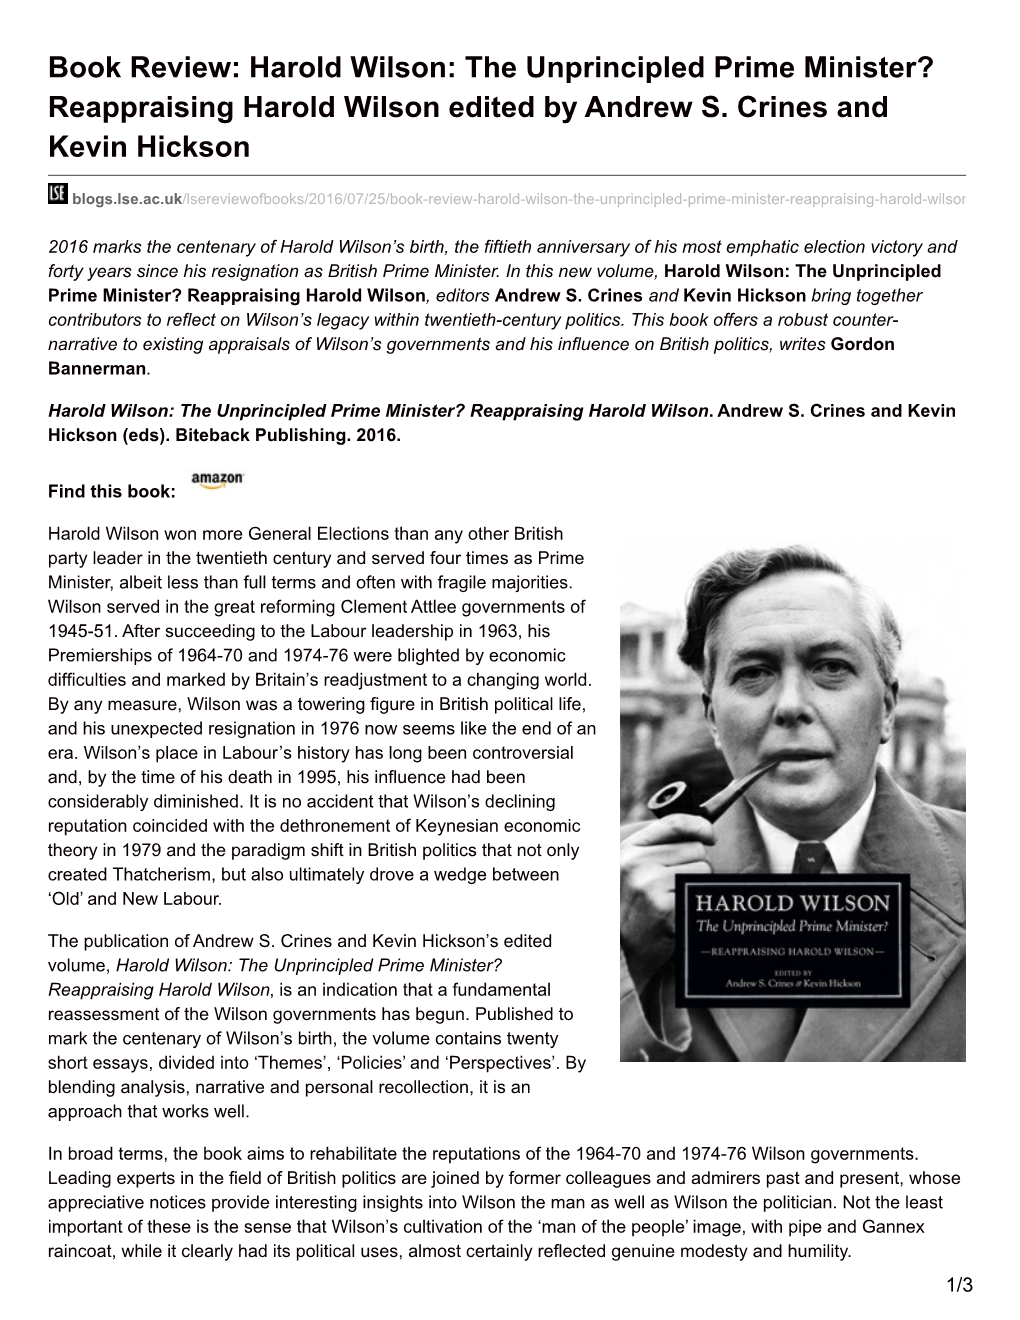 Book Review: Harold Wilson: the Unprincipled Prime Minister? Reappraising Harold Wilson Edited by Andrew S